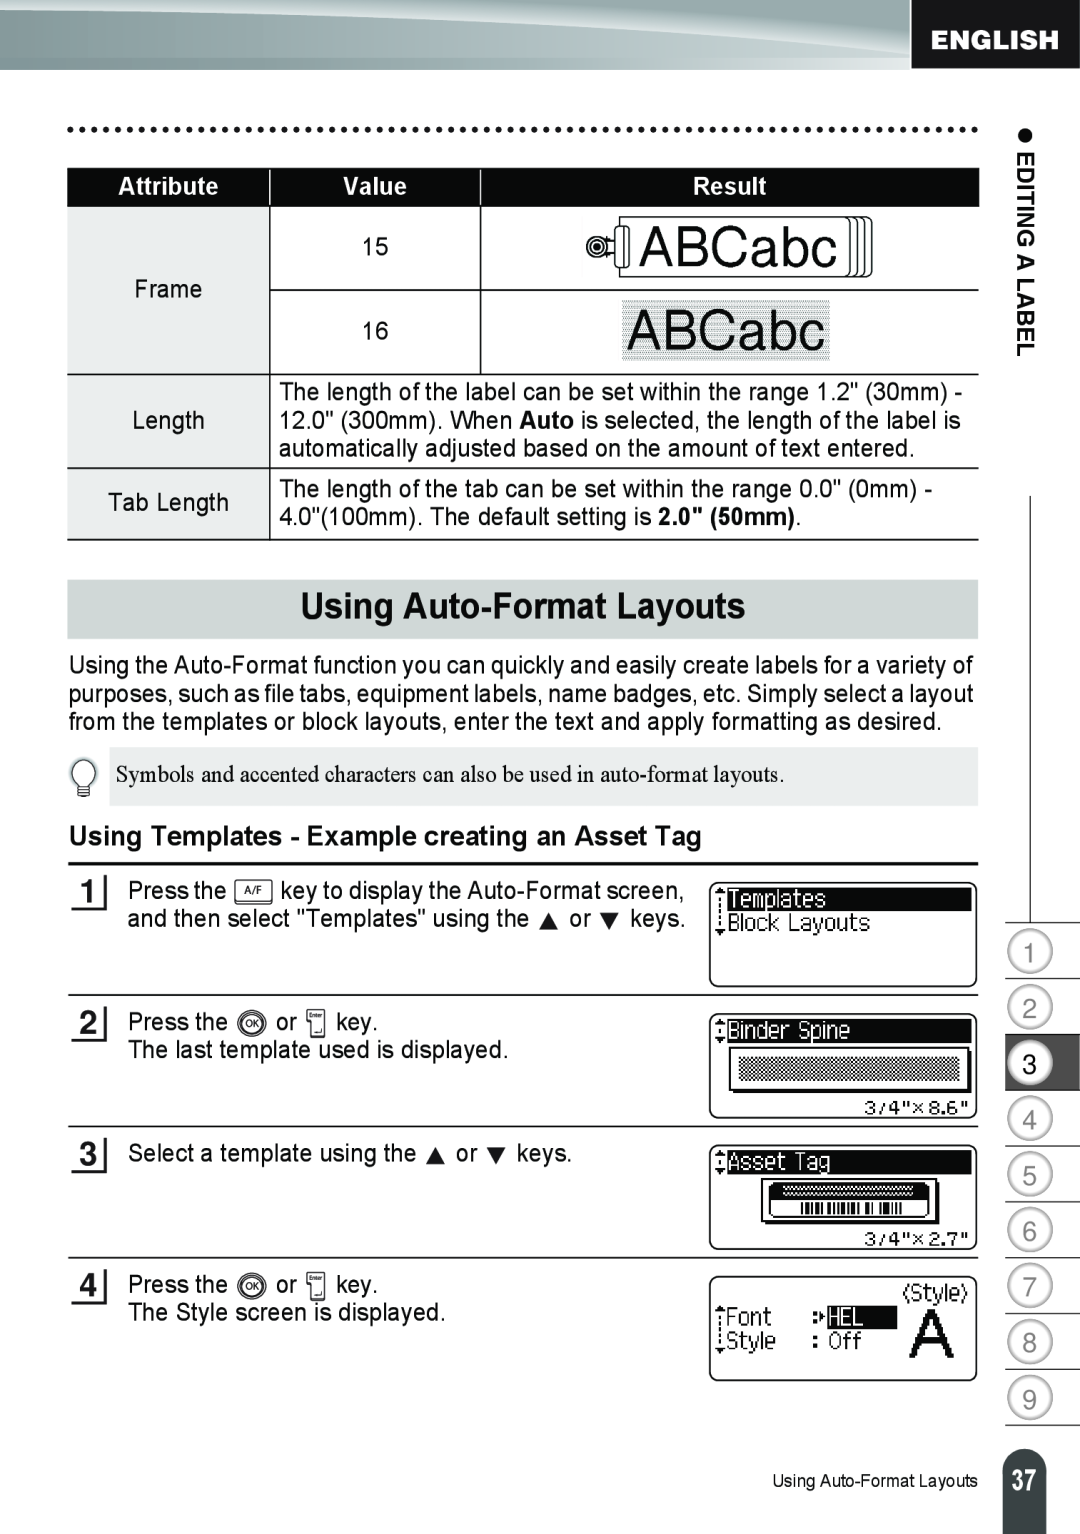 Brother PT-2100 manual Using Auto-Format Layouts, Using Templates - Example creating an Asset Tag, Attribute, Value, Result 